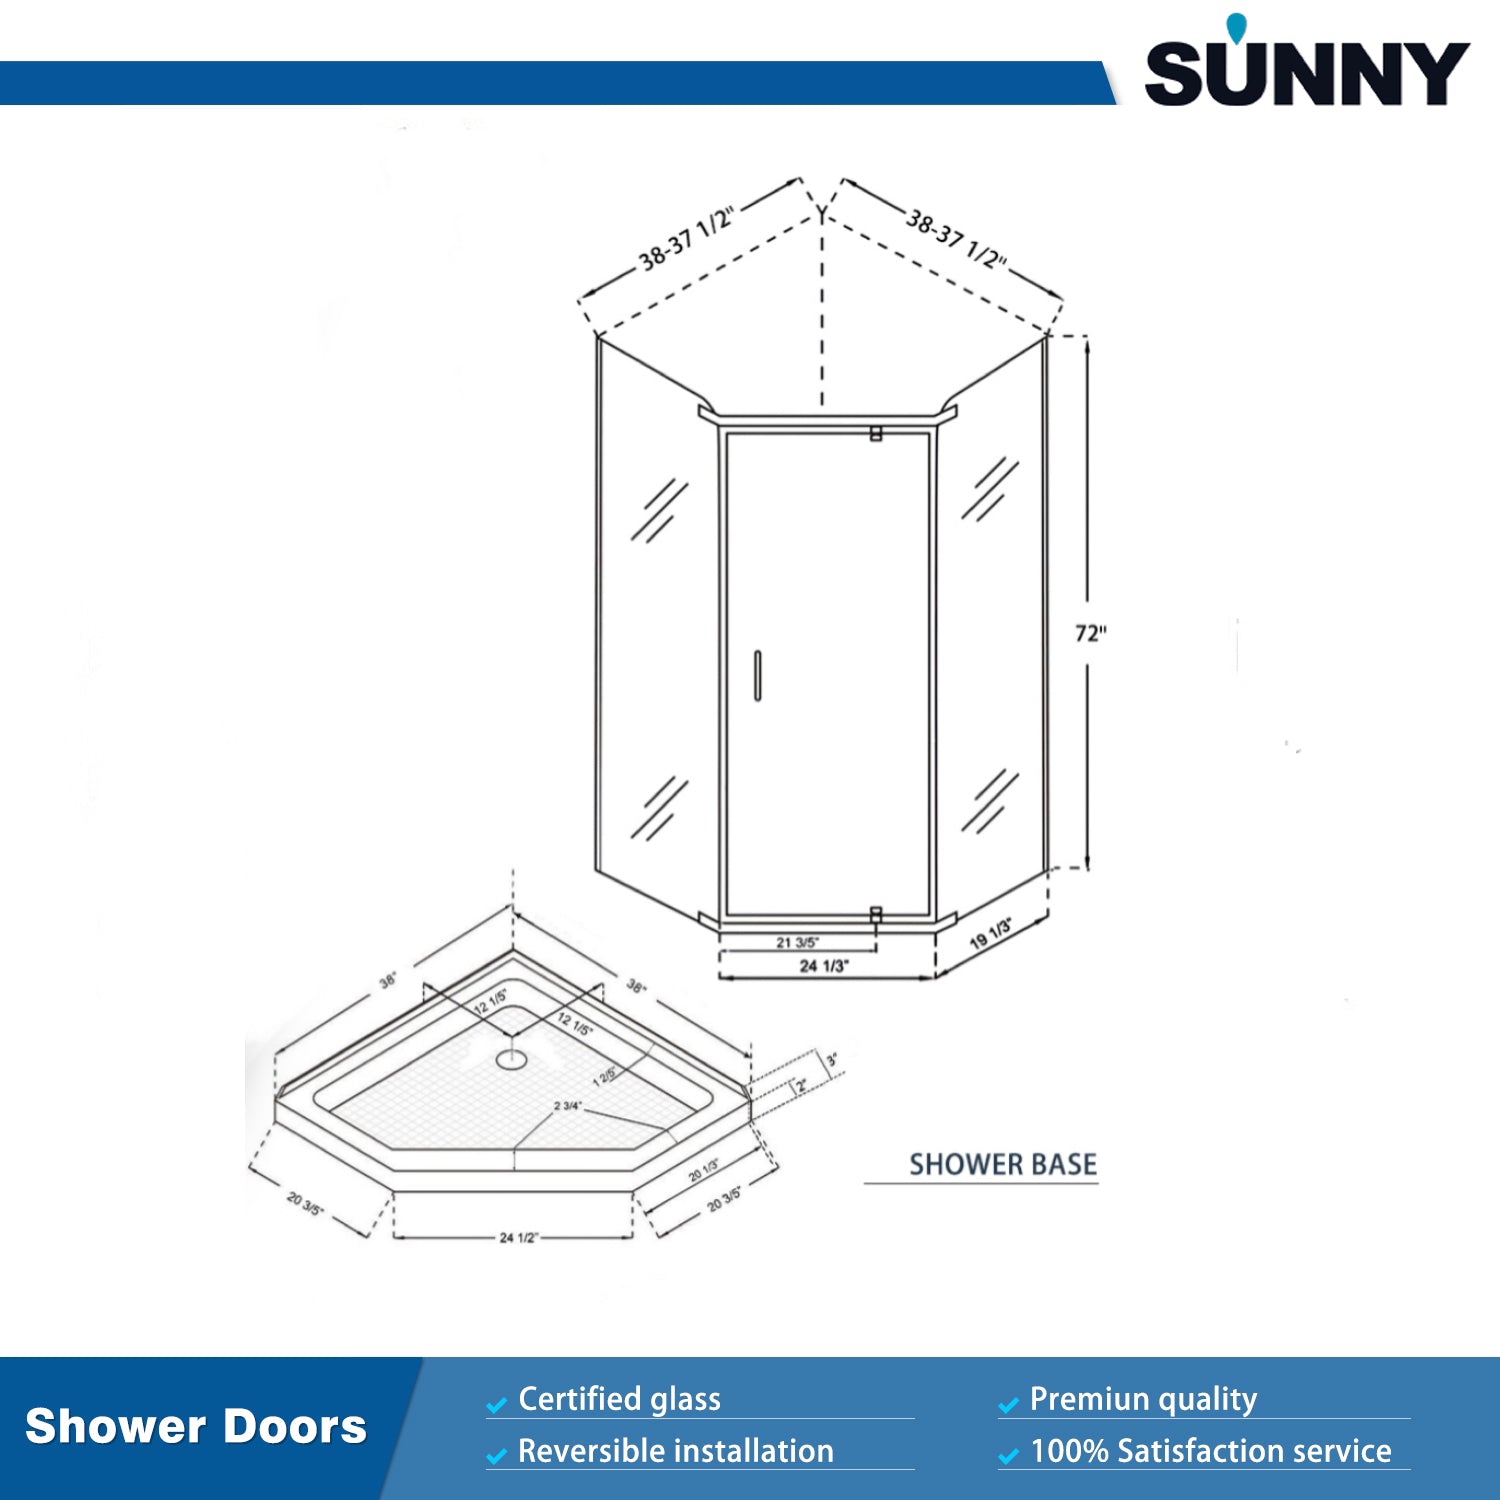 SUNNY SHOWER 36.7 in. W x 36.7 in. D x 71.8 in. H Black Finish Pivot Enclosures With Pivot Door And White Diamond Bases Dimensions